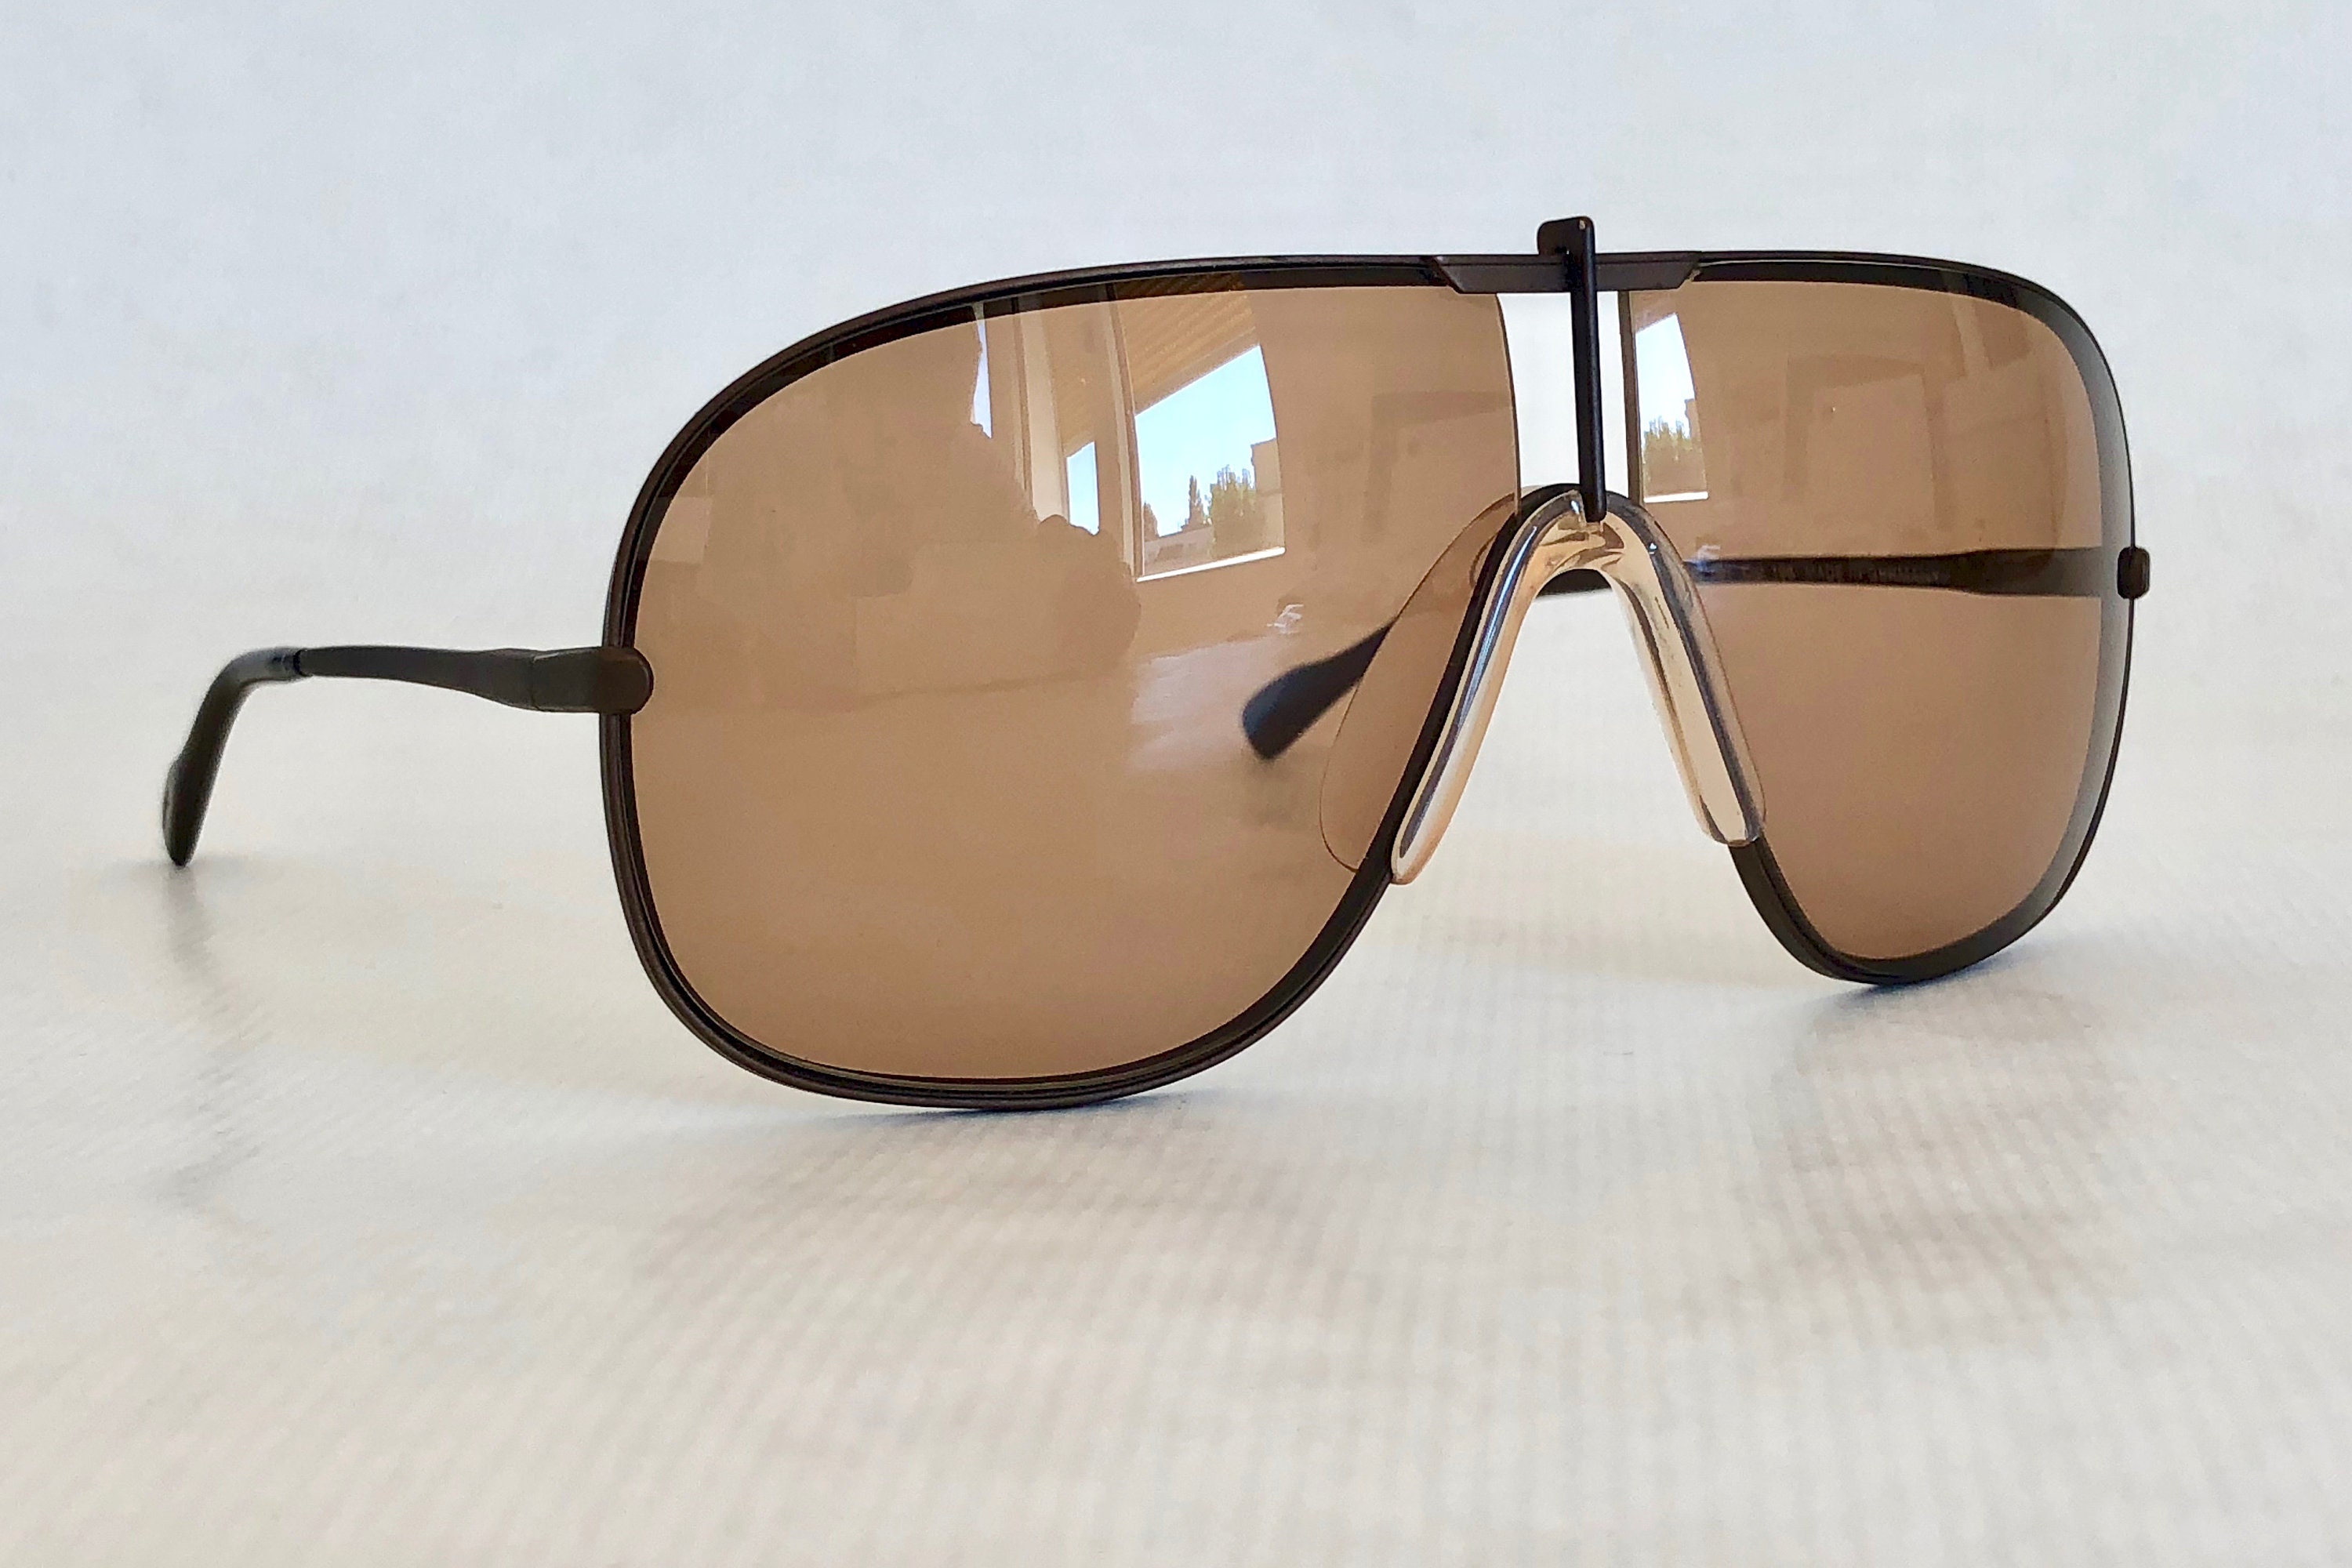 TITAN by Atrio 691 Vintage Sunglasses New Old Stock Made in West Germany